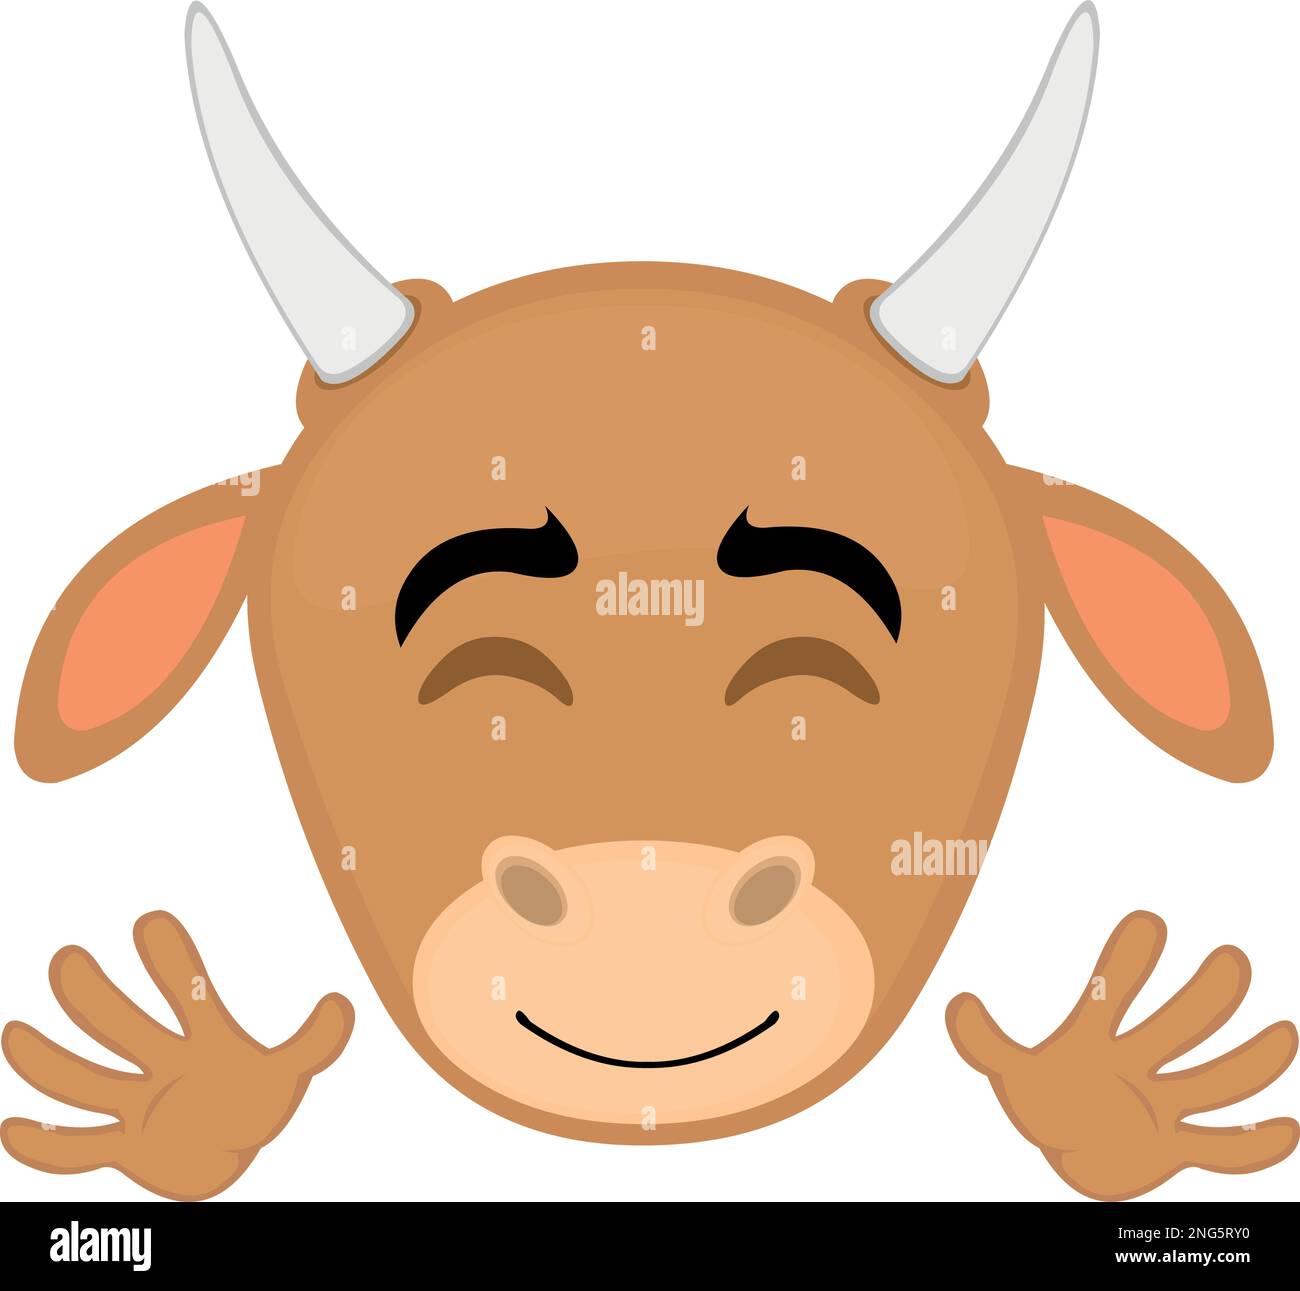 vector illustration cow face cartoon with a happy expression and waving with hands Stock Vector